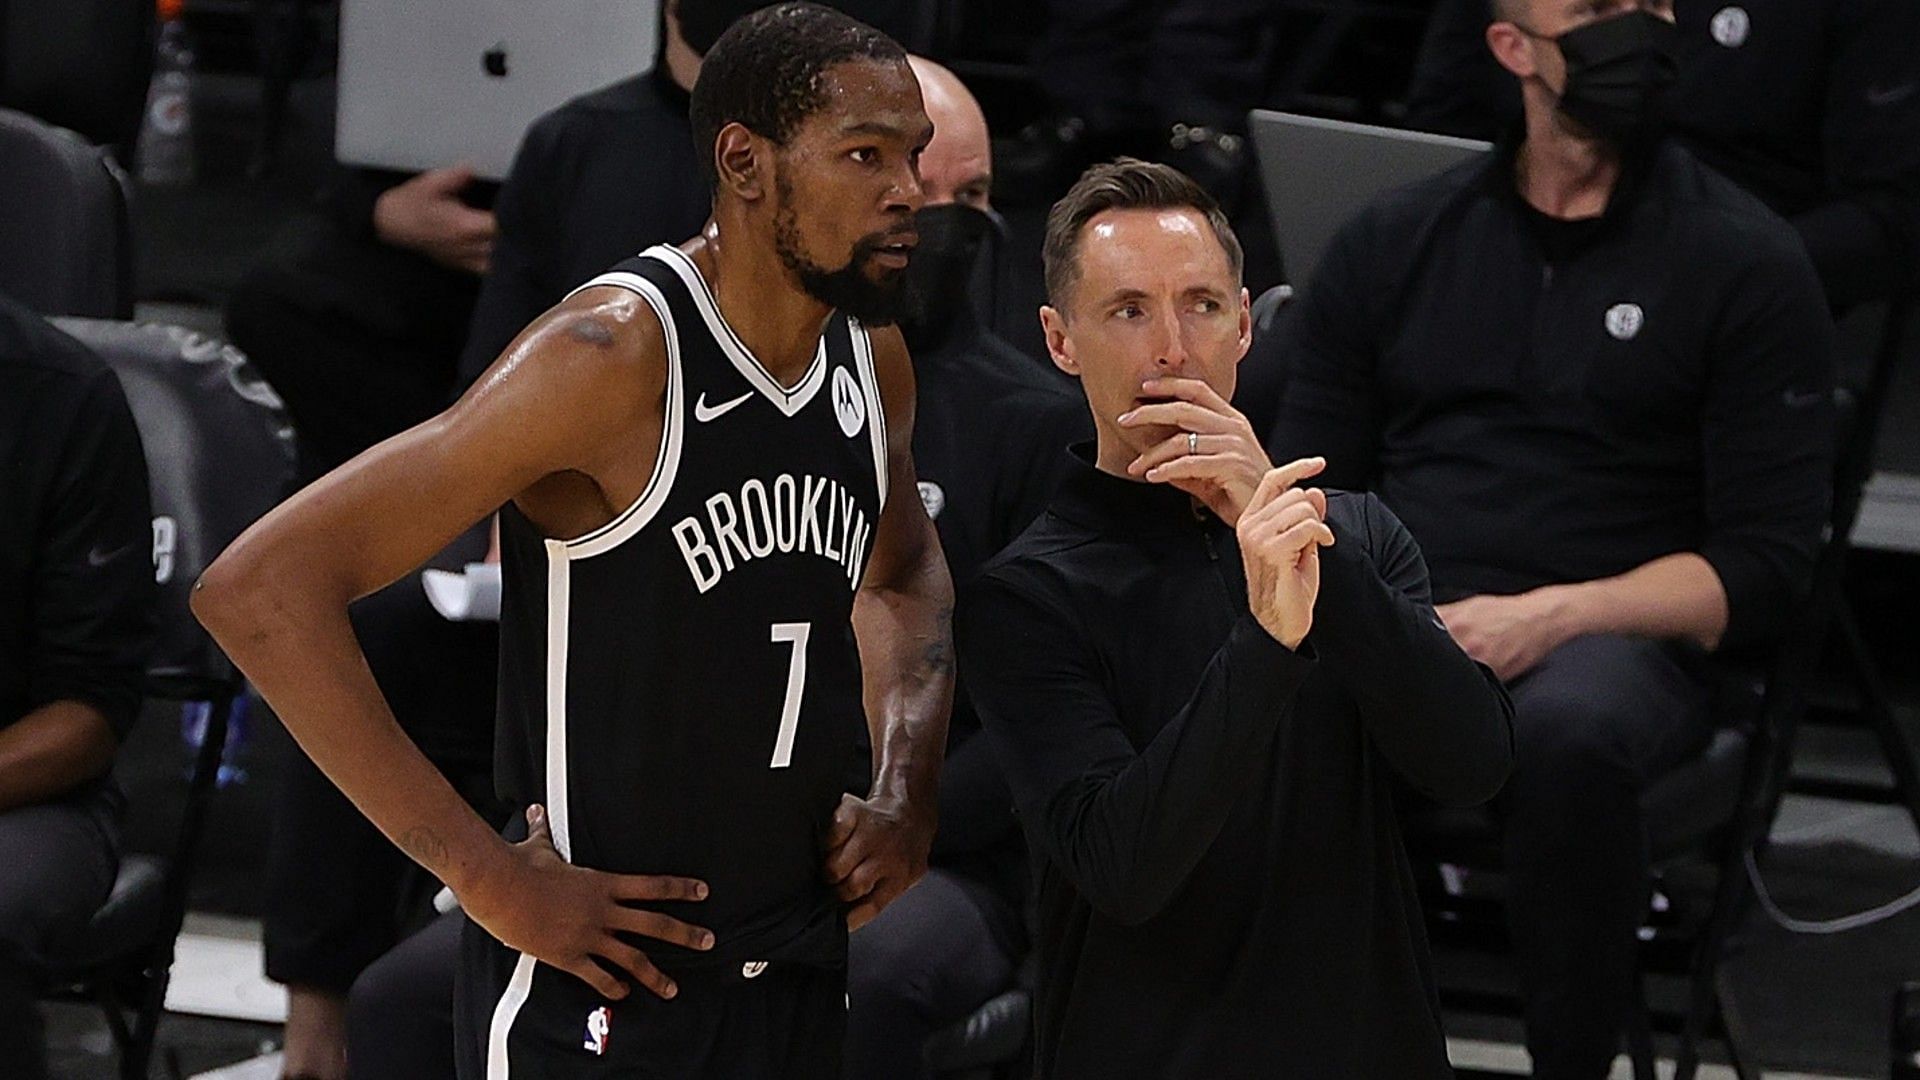 Steve Nash has to make drastic changes to put Kevin Durant in ideal positions to score. [Photo: Sporting News]